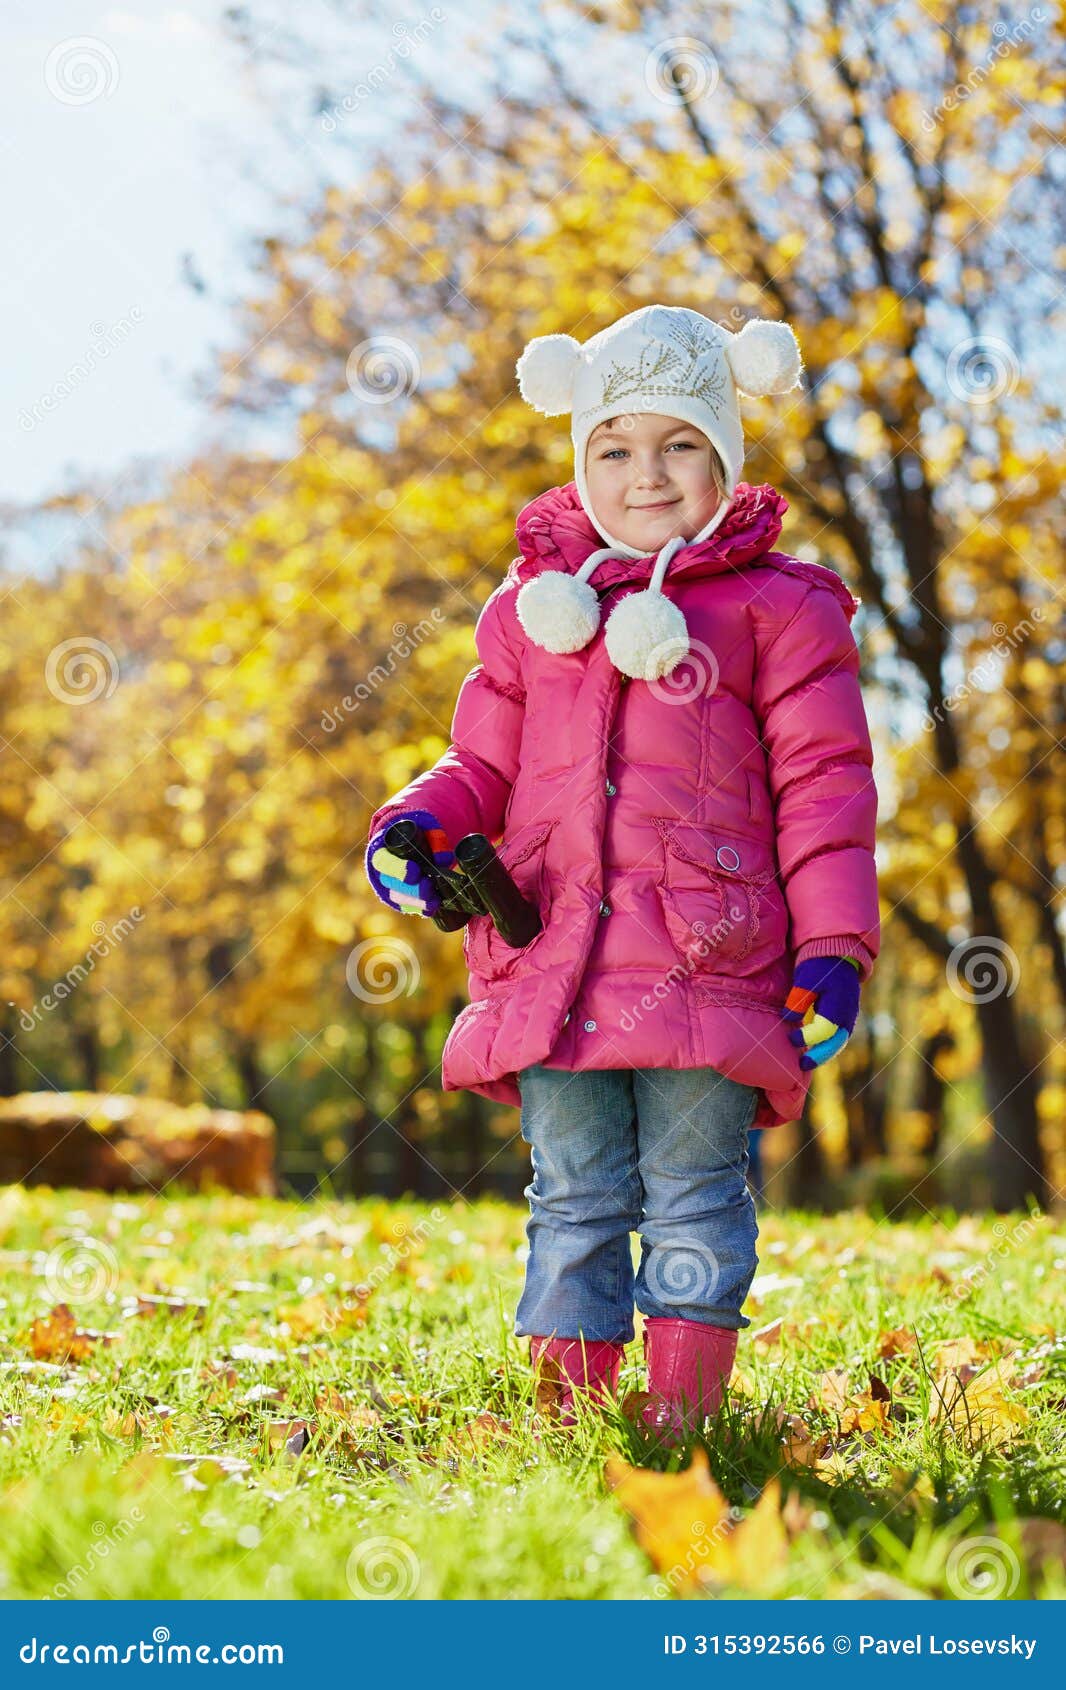 little girl with binocular stands on grassy glade